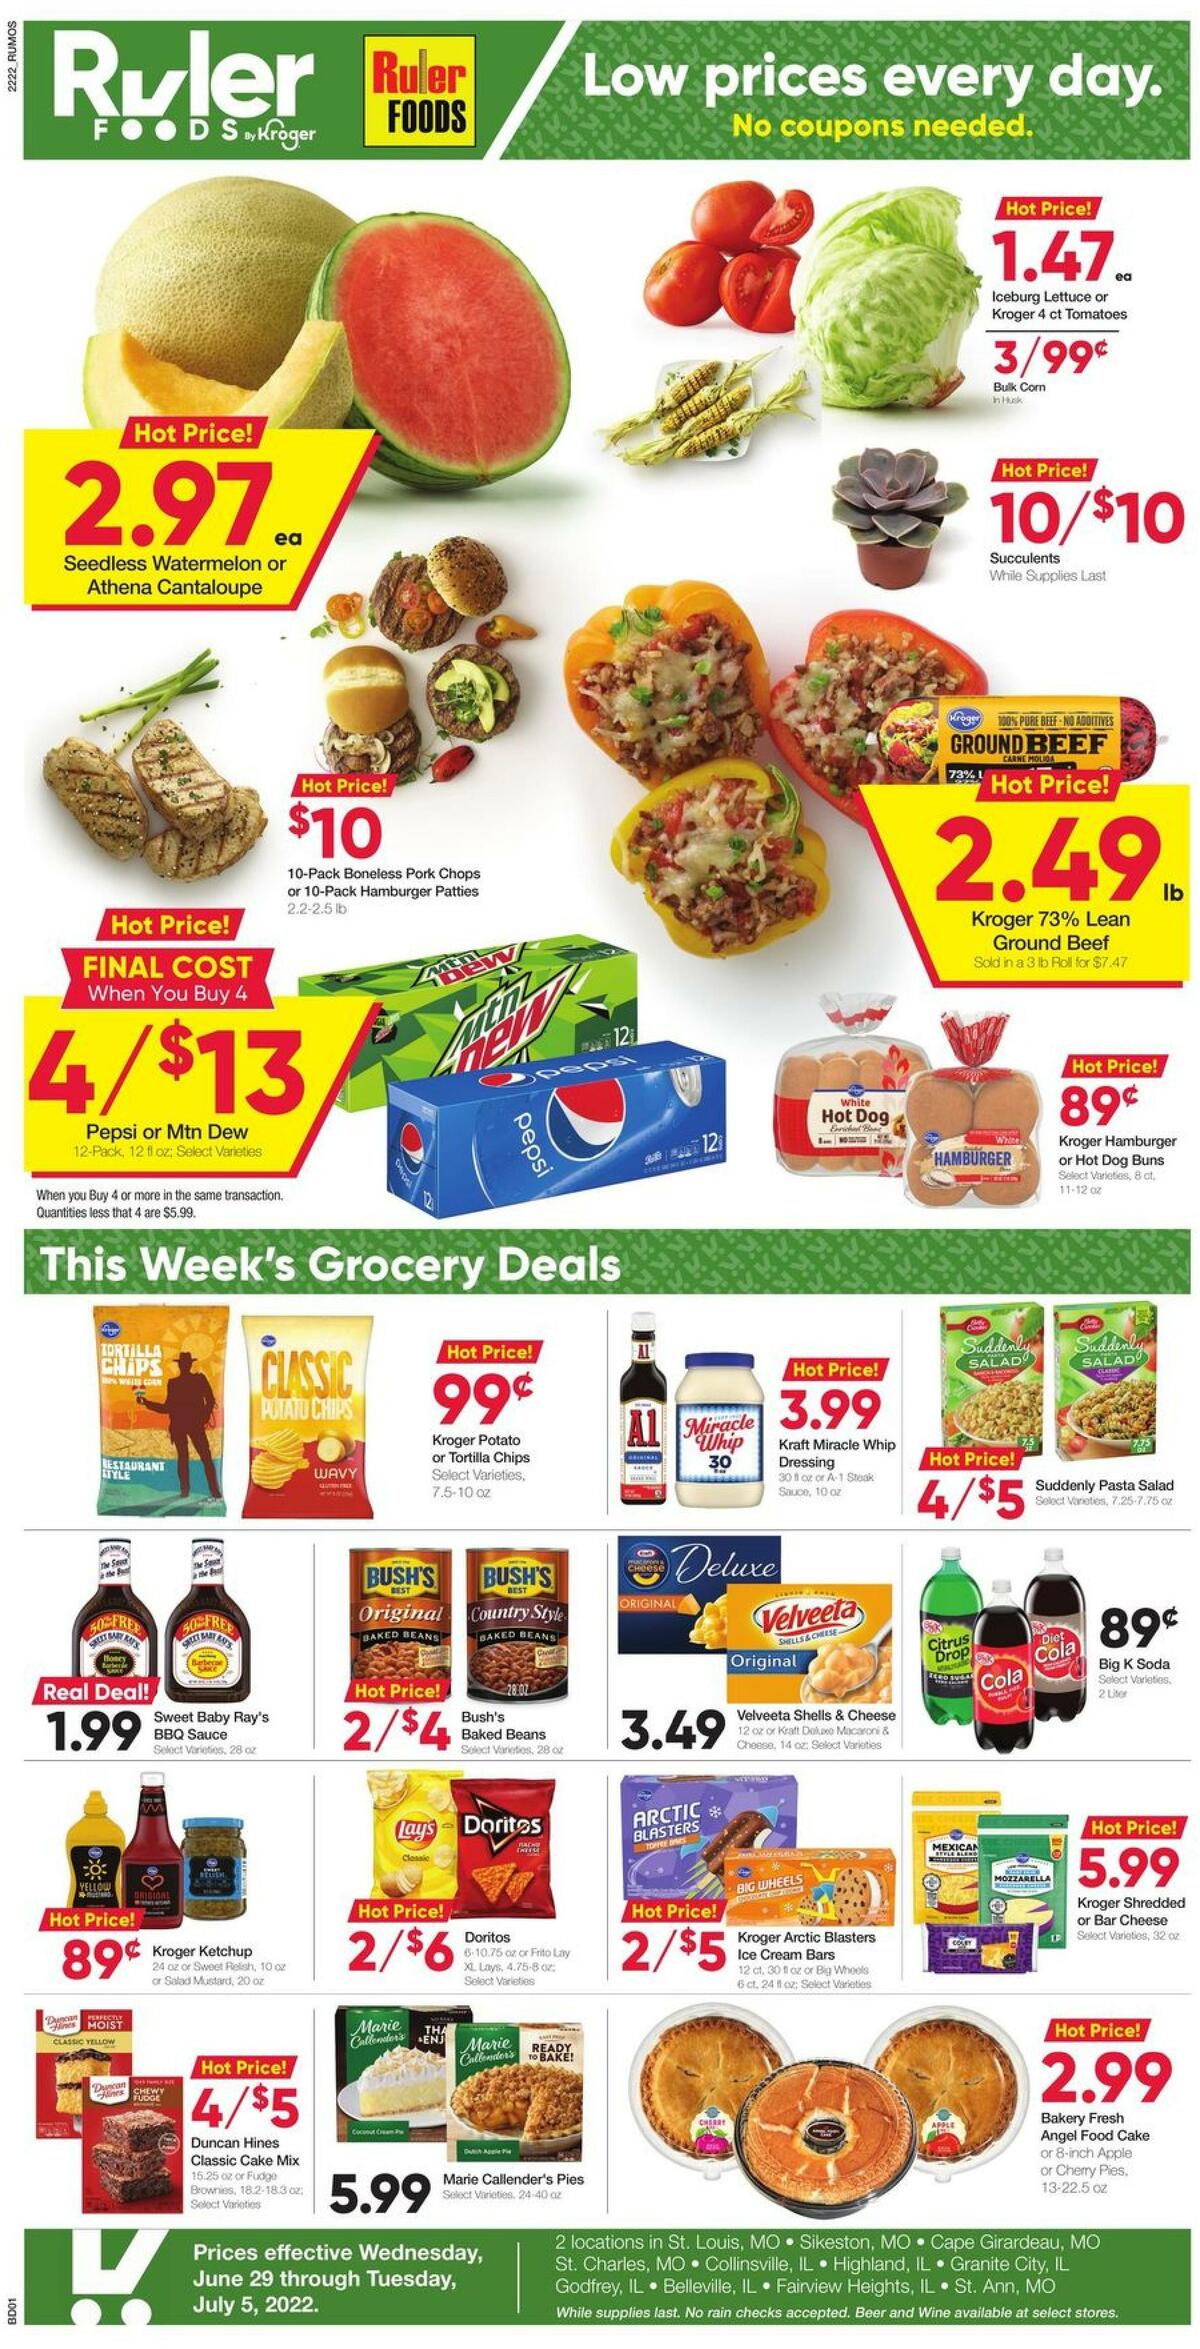 Ruler Foods Weekly Ad from June 29